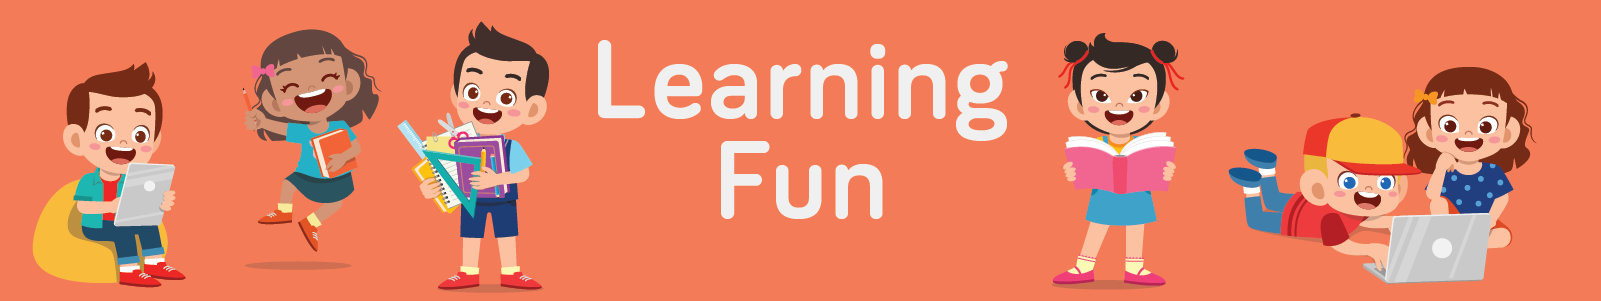 Learning Fun graphic banner